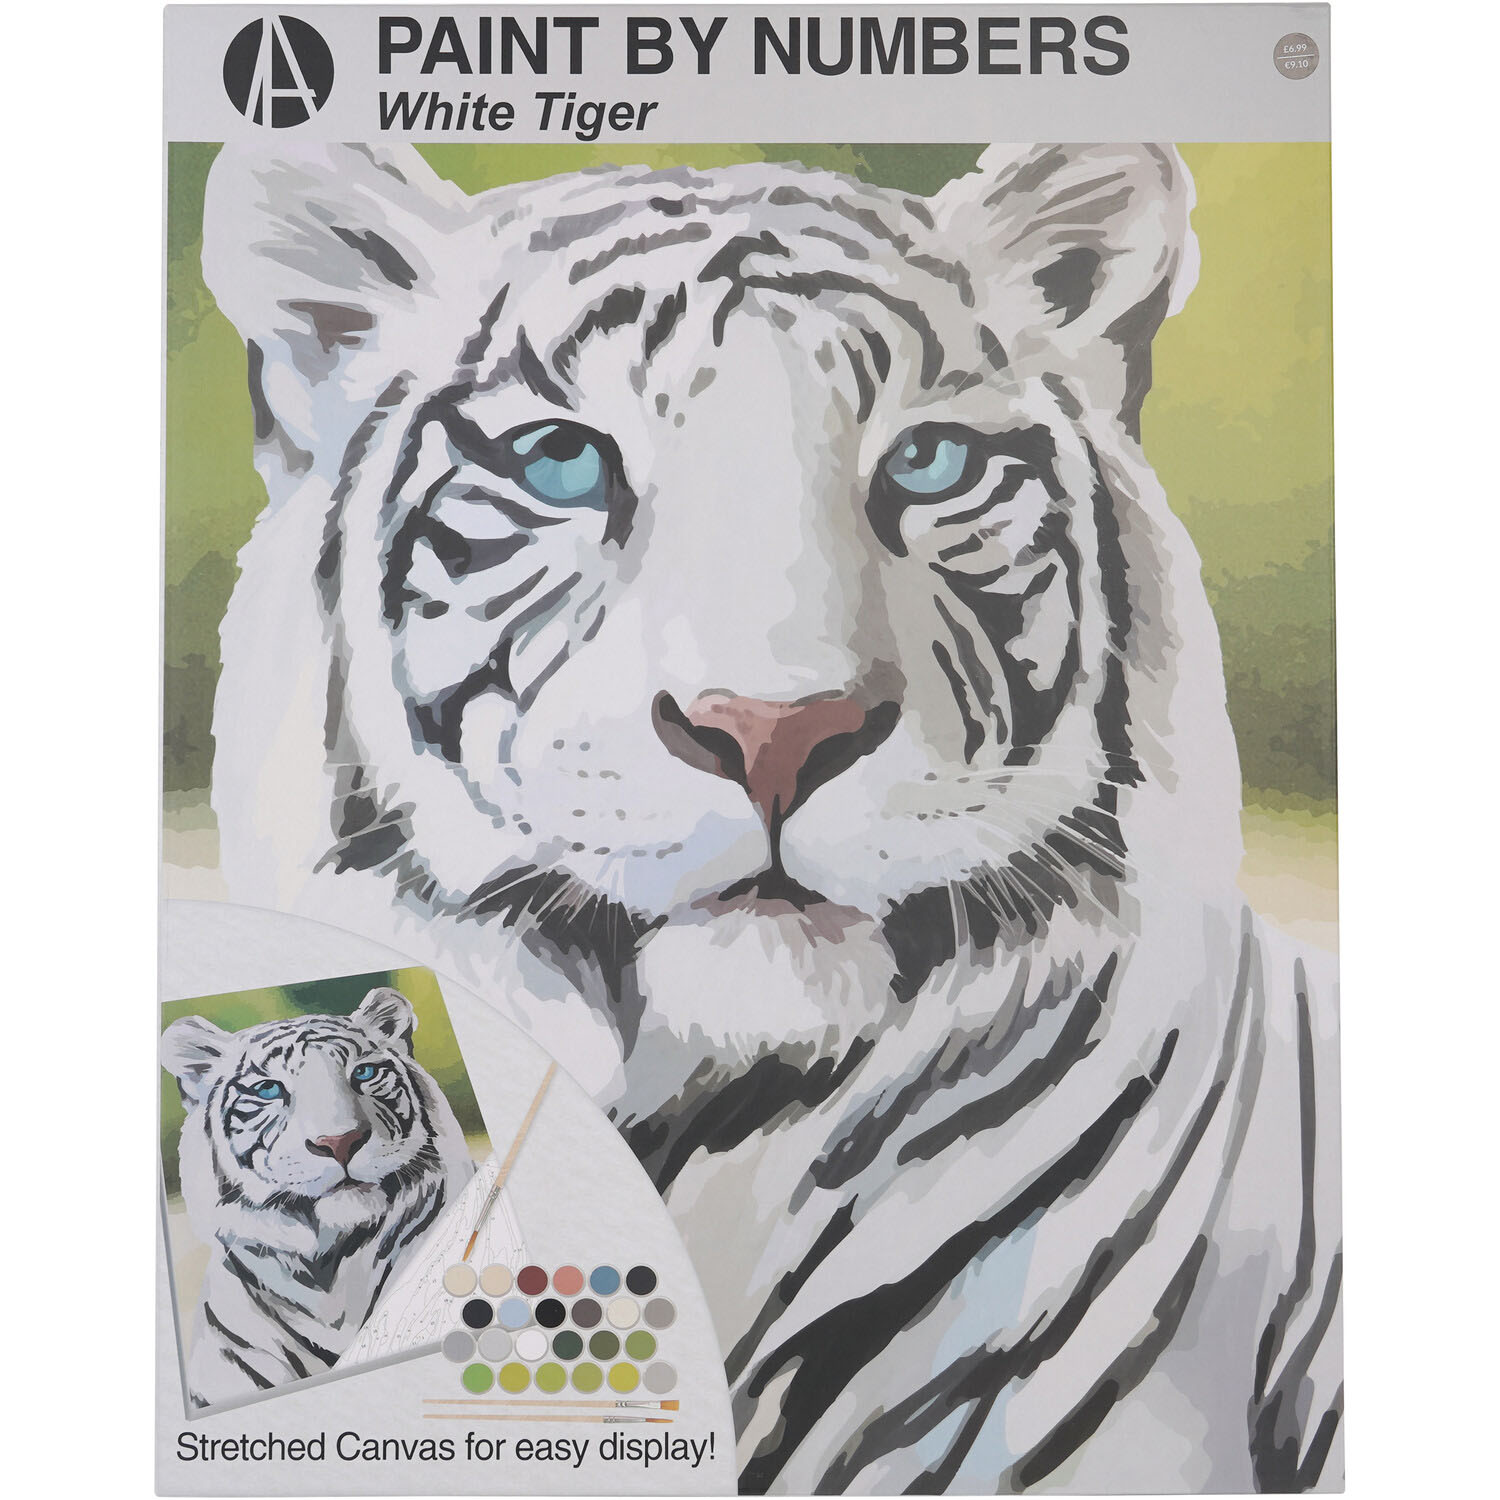 Ledg Paint by Numbers for Adults: Beginner to Advanced Number Painting Kit - Fun DIY Adult Arts and Crafts Projects - Kits I